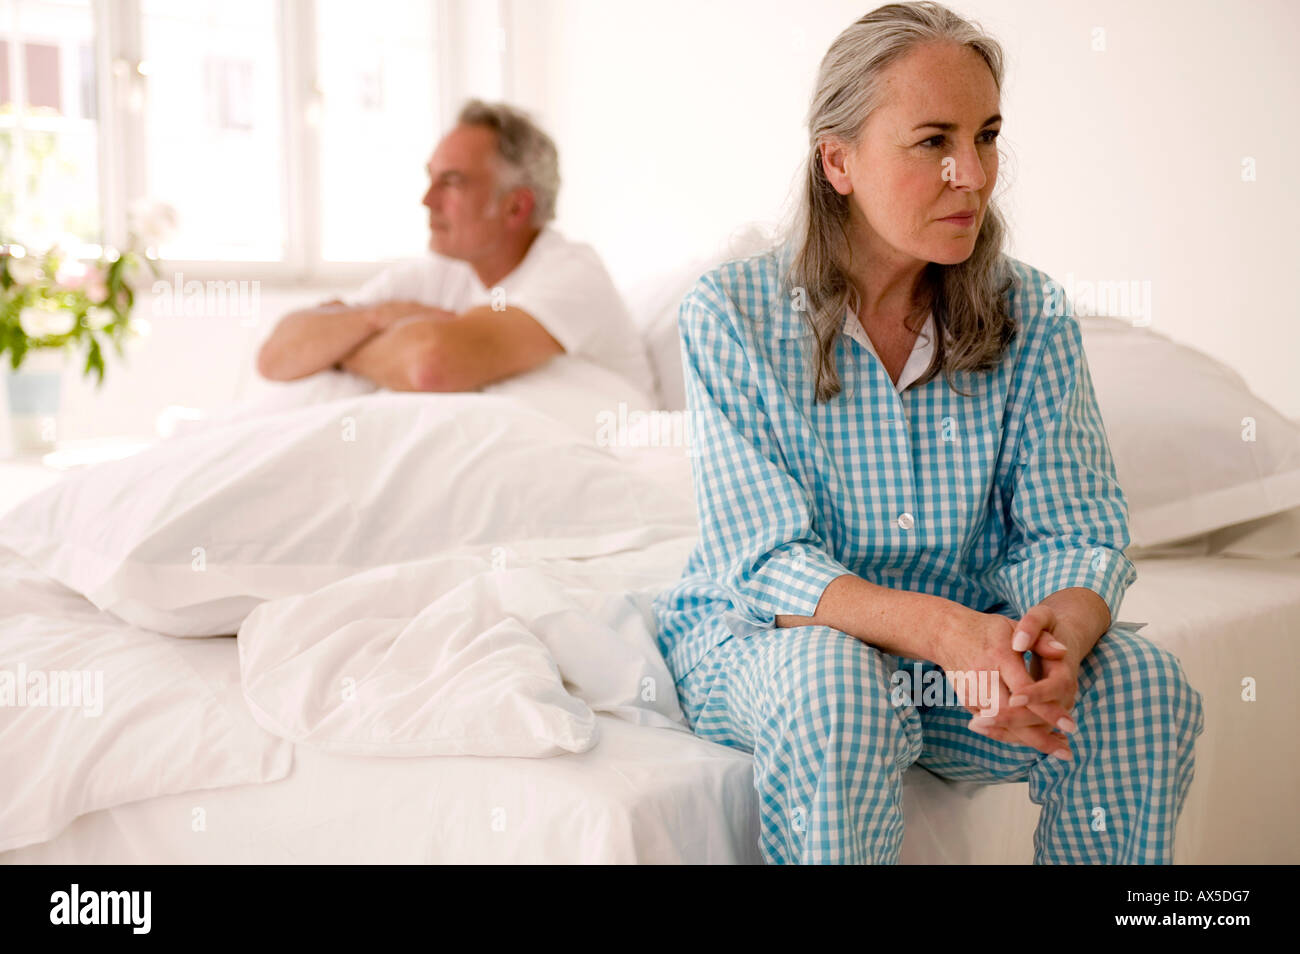 Mature couple sitting on bed (focus on woman in foreground) Stock Photo